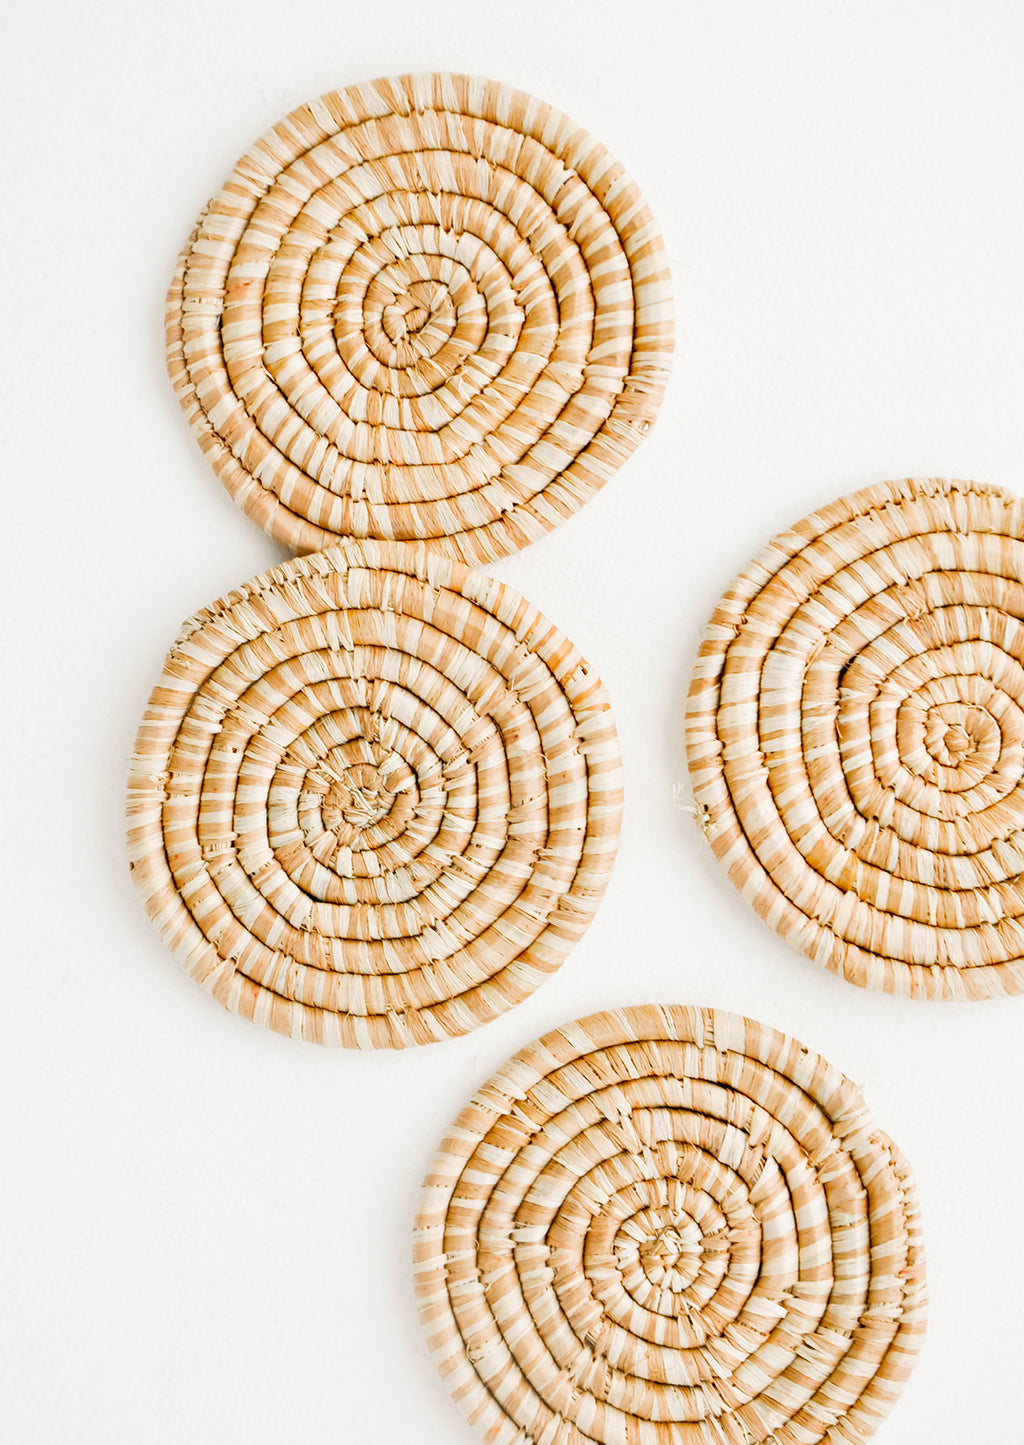 Tan: Set of 4 Round Woven Raffia Coasters in Tan and natural stripe.